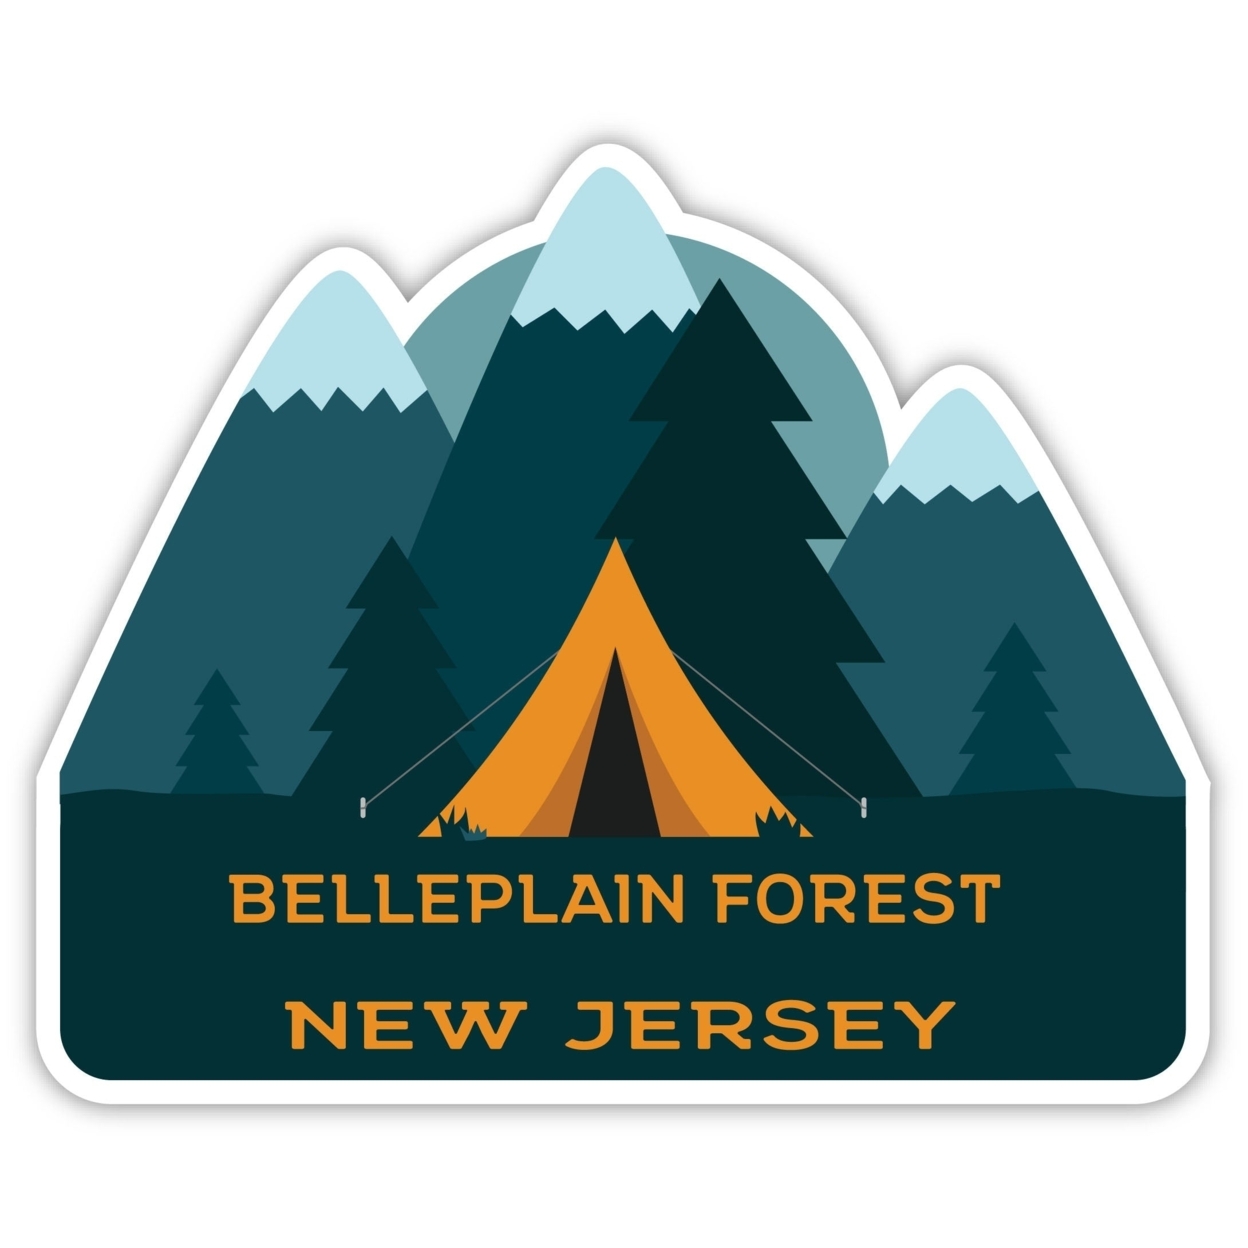 Belleplain Forest New Jersey Souvenir Decorative Stickers (Choose Theme And Size) - 4-Pack, 6-Inch, Tent